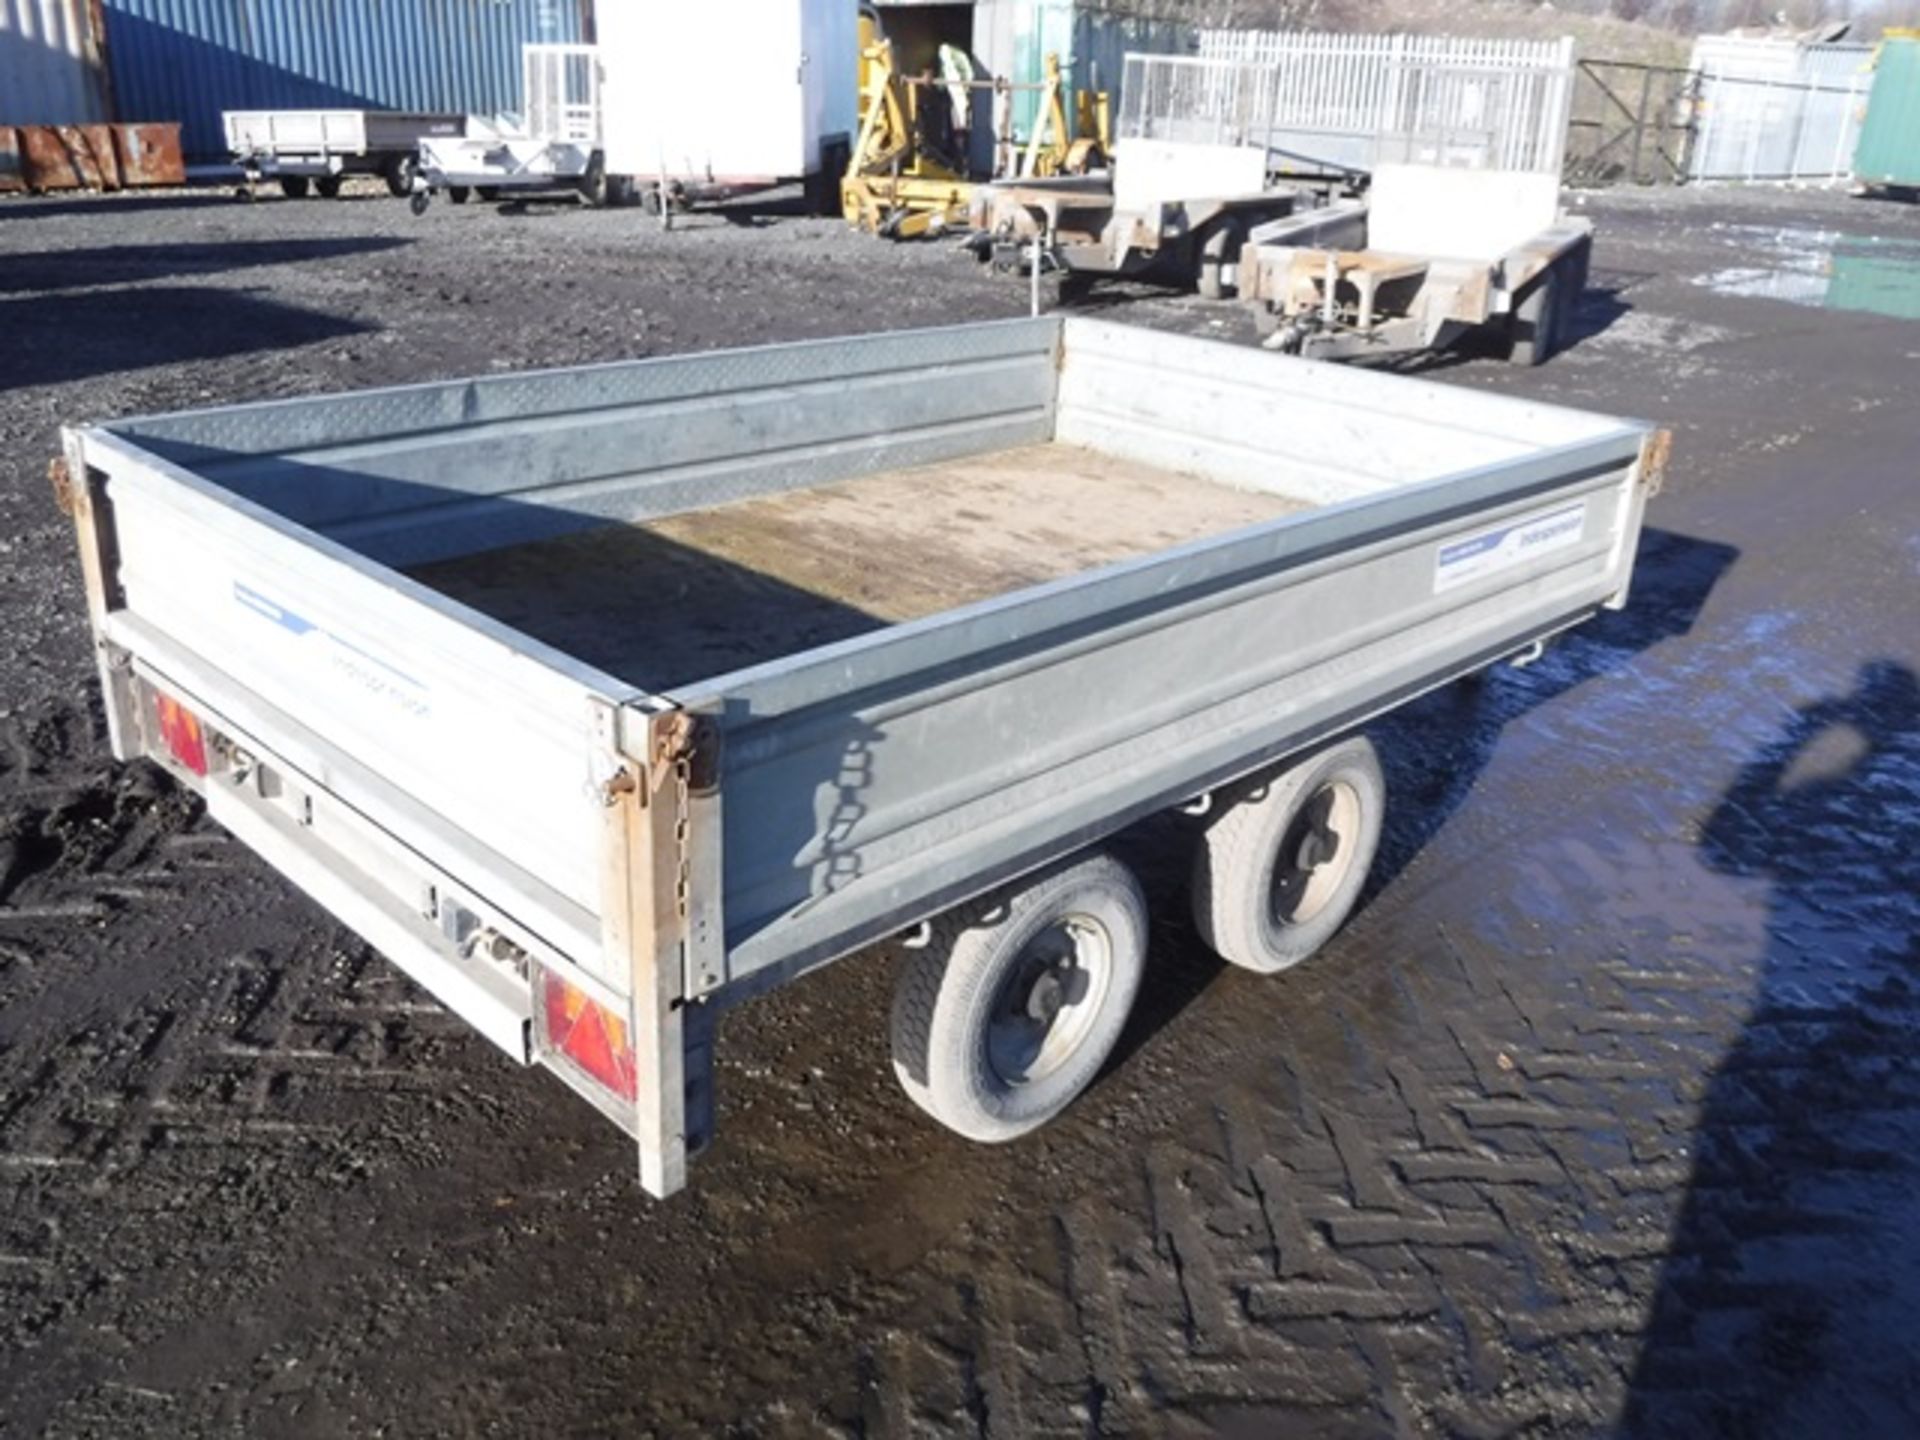 INDESPENSION 8' X 4.5' TWIN AXLE DROP SIDE TRAILER. ID 079183. ASSET NO 758-6222 - Image 2 of 5